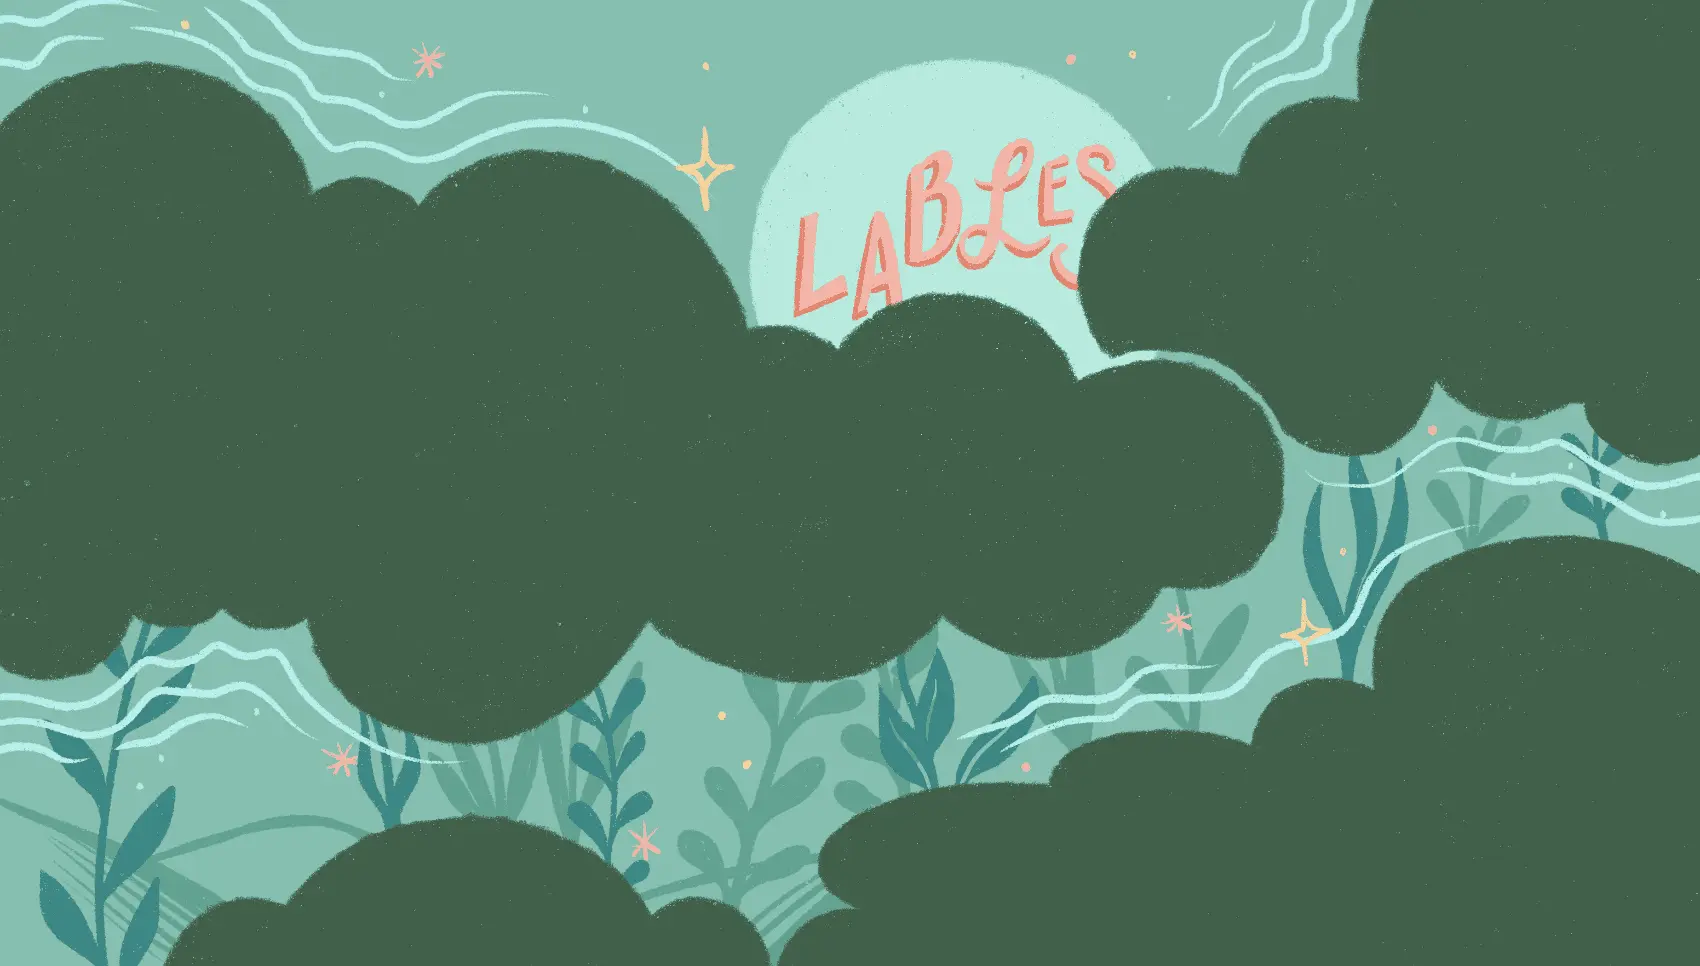 A murky scene, clouds parting to reveal a full moon with the word 'labels' misspelled 'lables.'